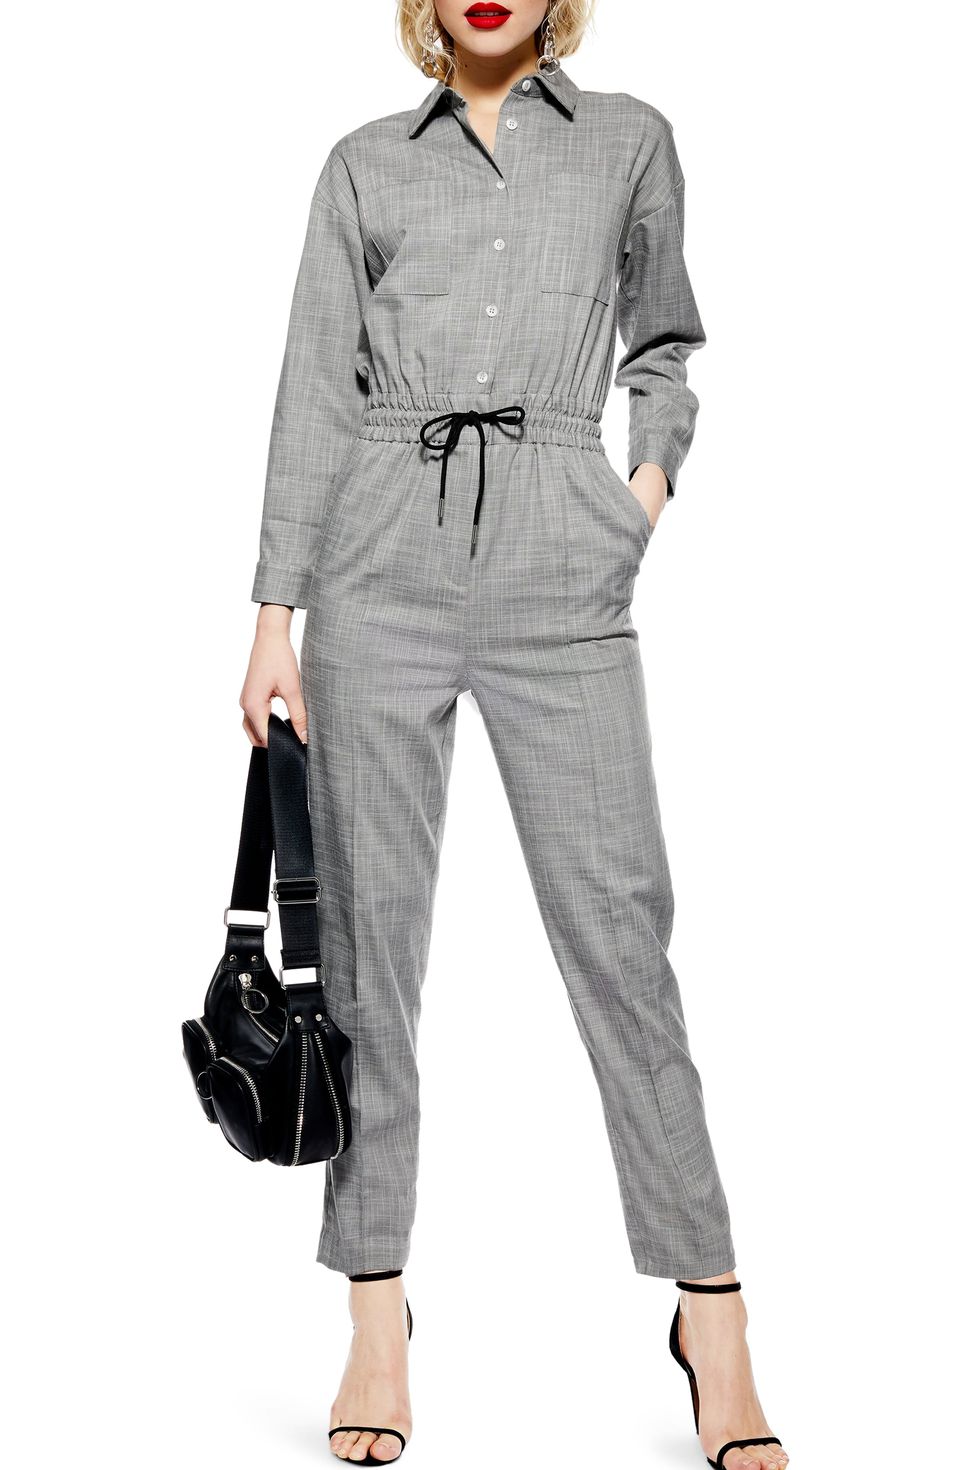 Fabulous Summer Jumpsuits? Yes, Please